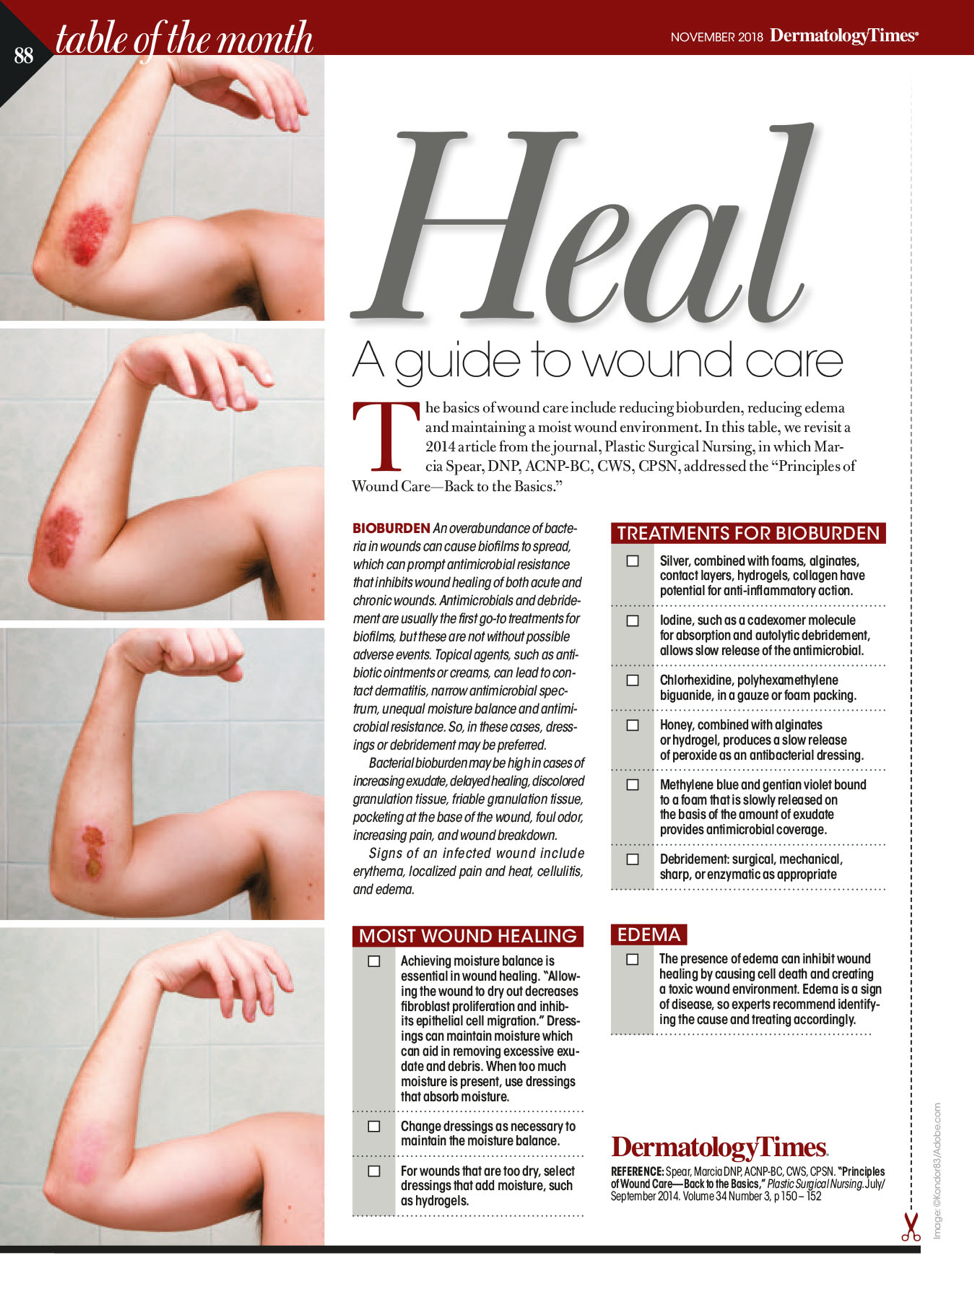 A guide to wound care